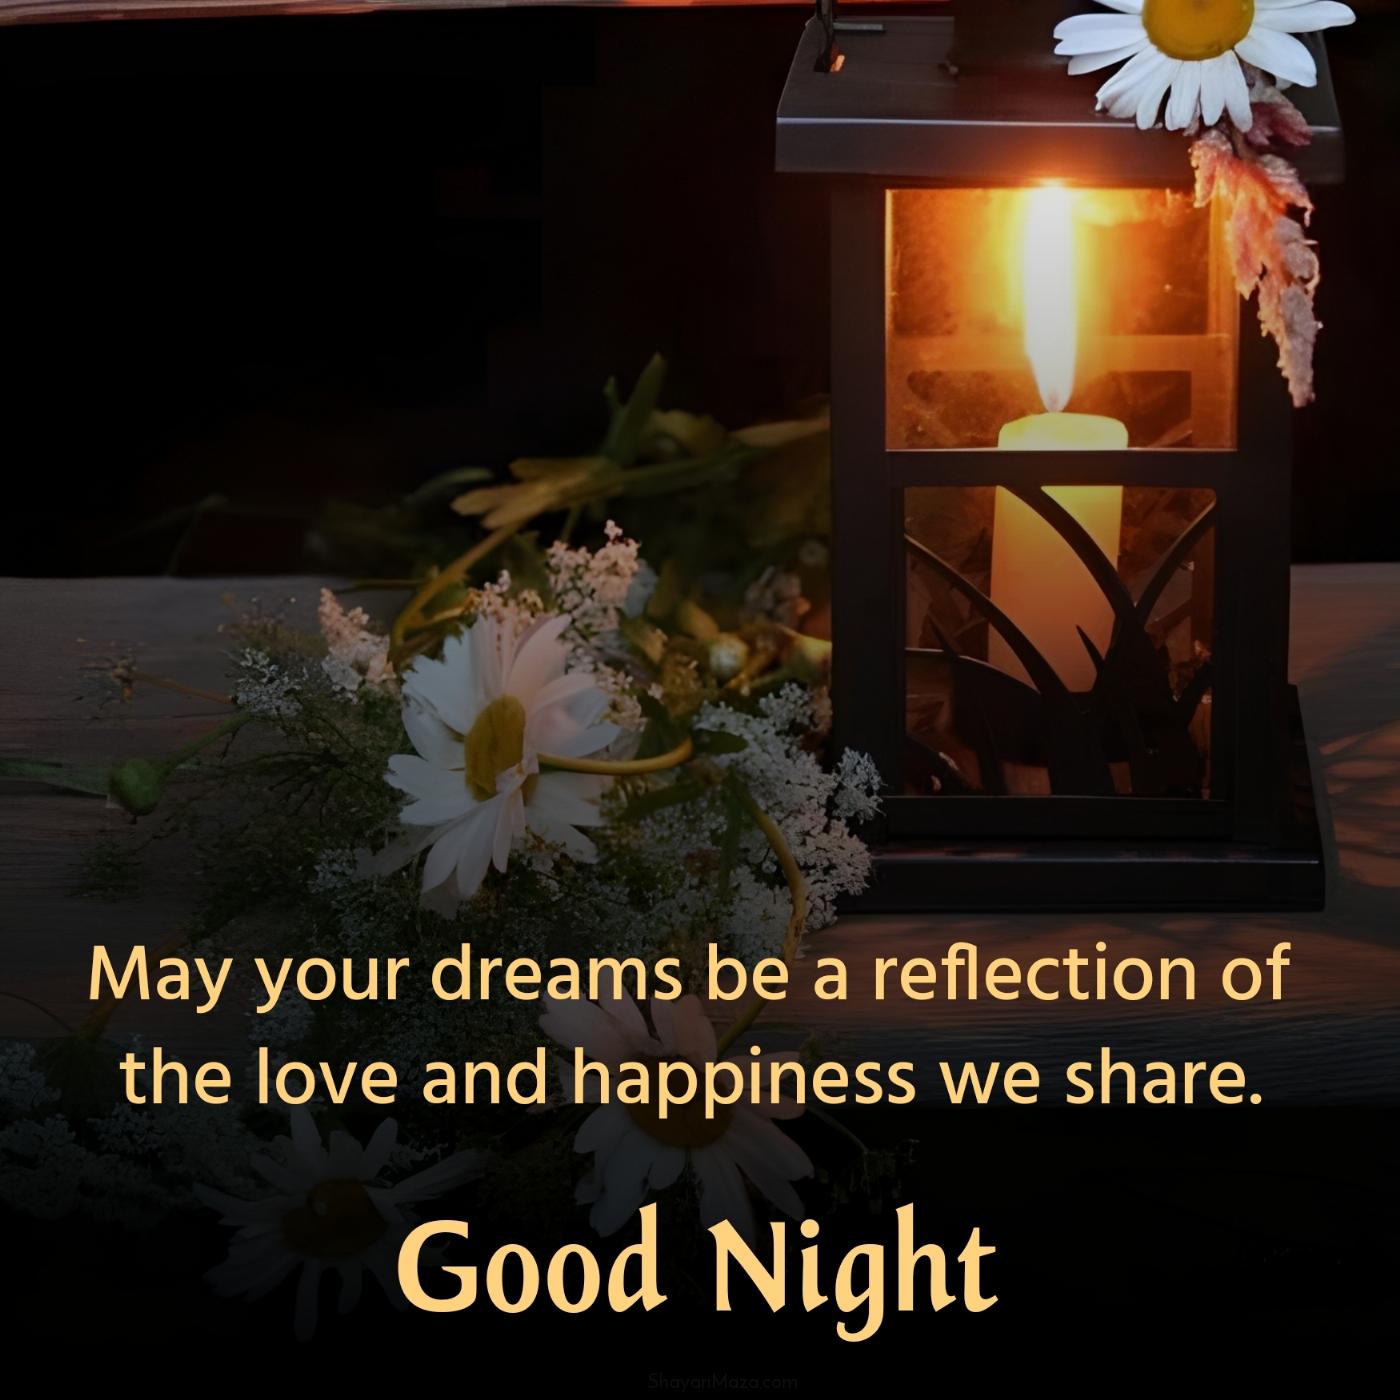 May your dreams be a reflection of the love and happiness